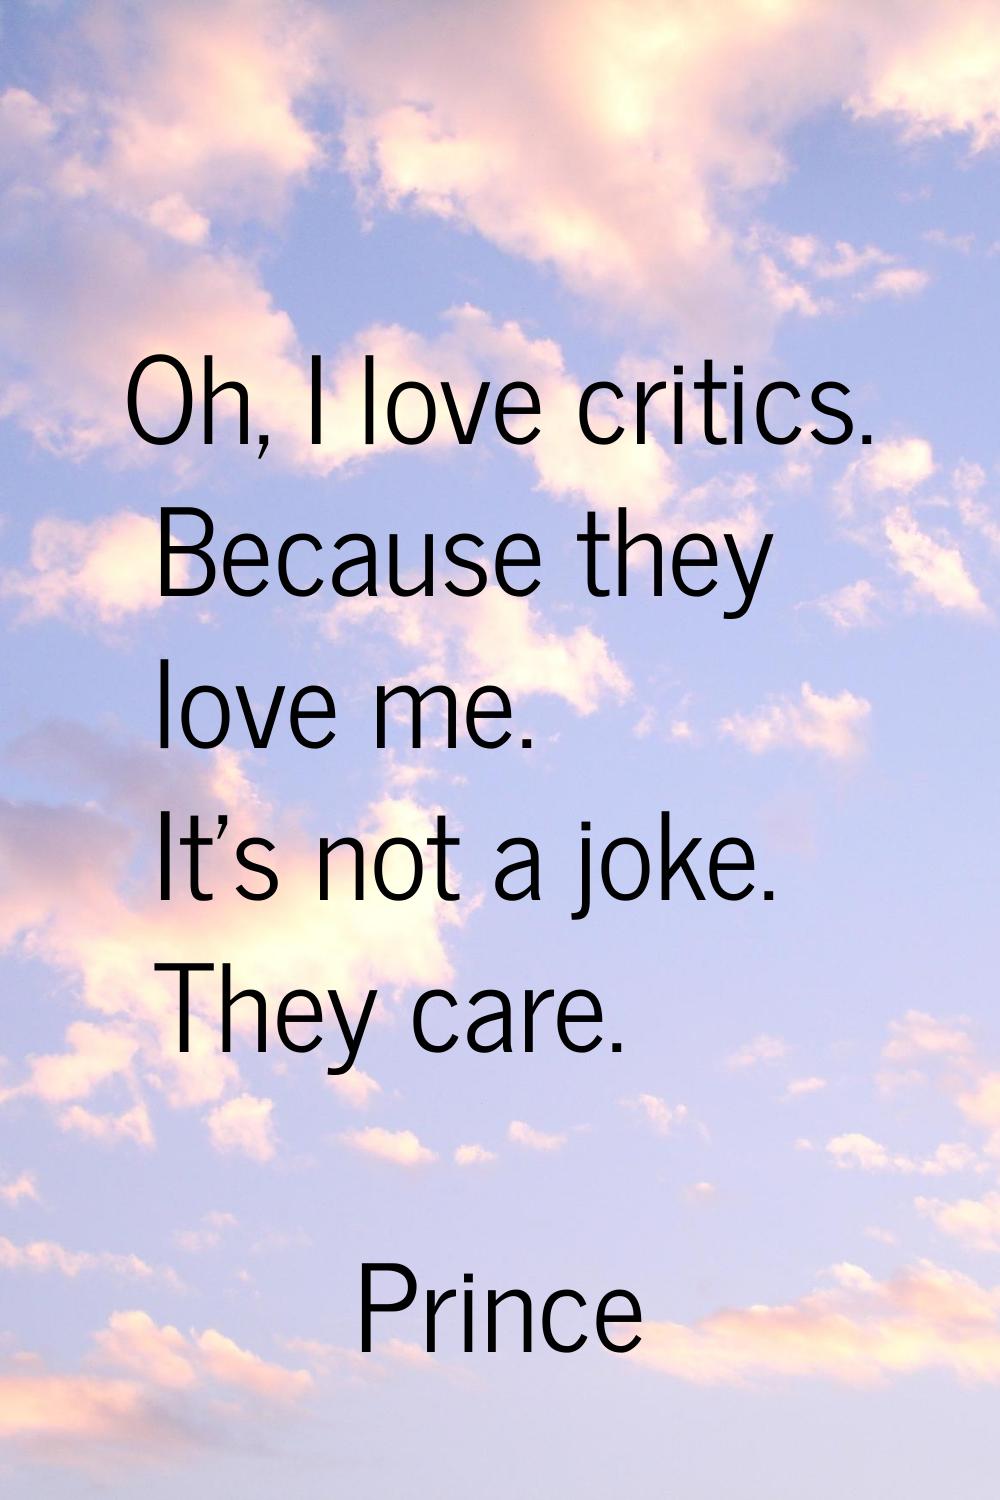 Oh, I love critics. Because they love me. It's not a joke. They care.